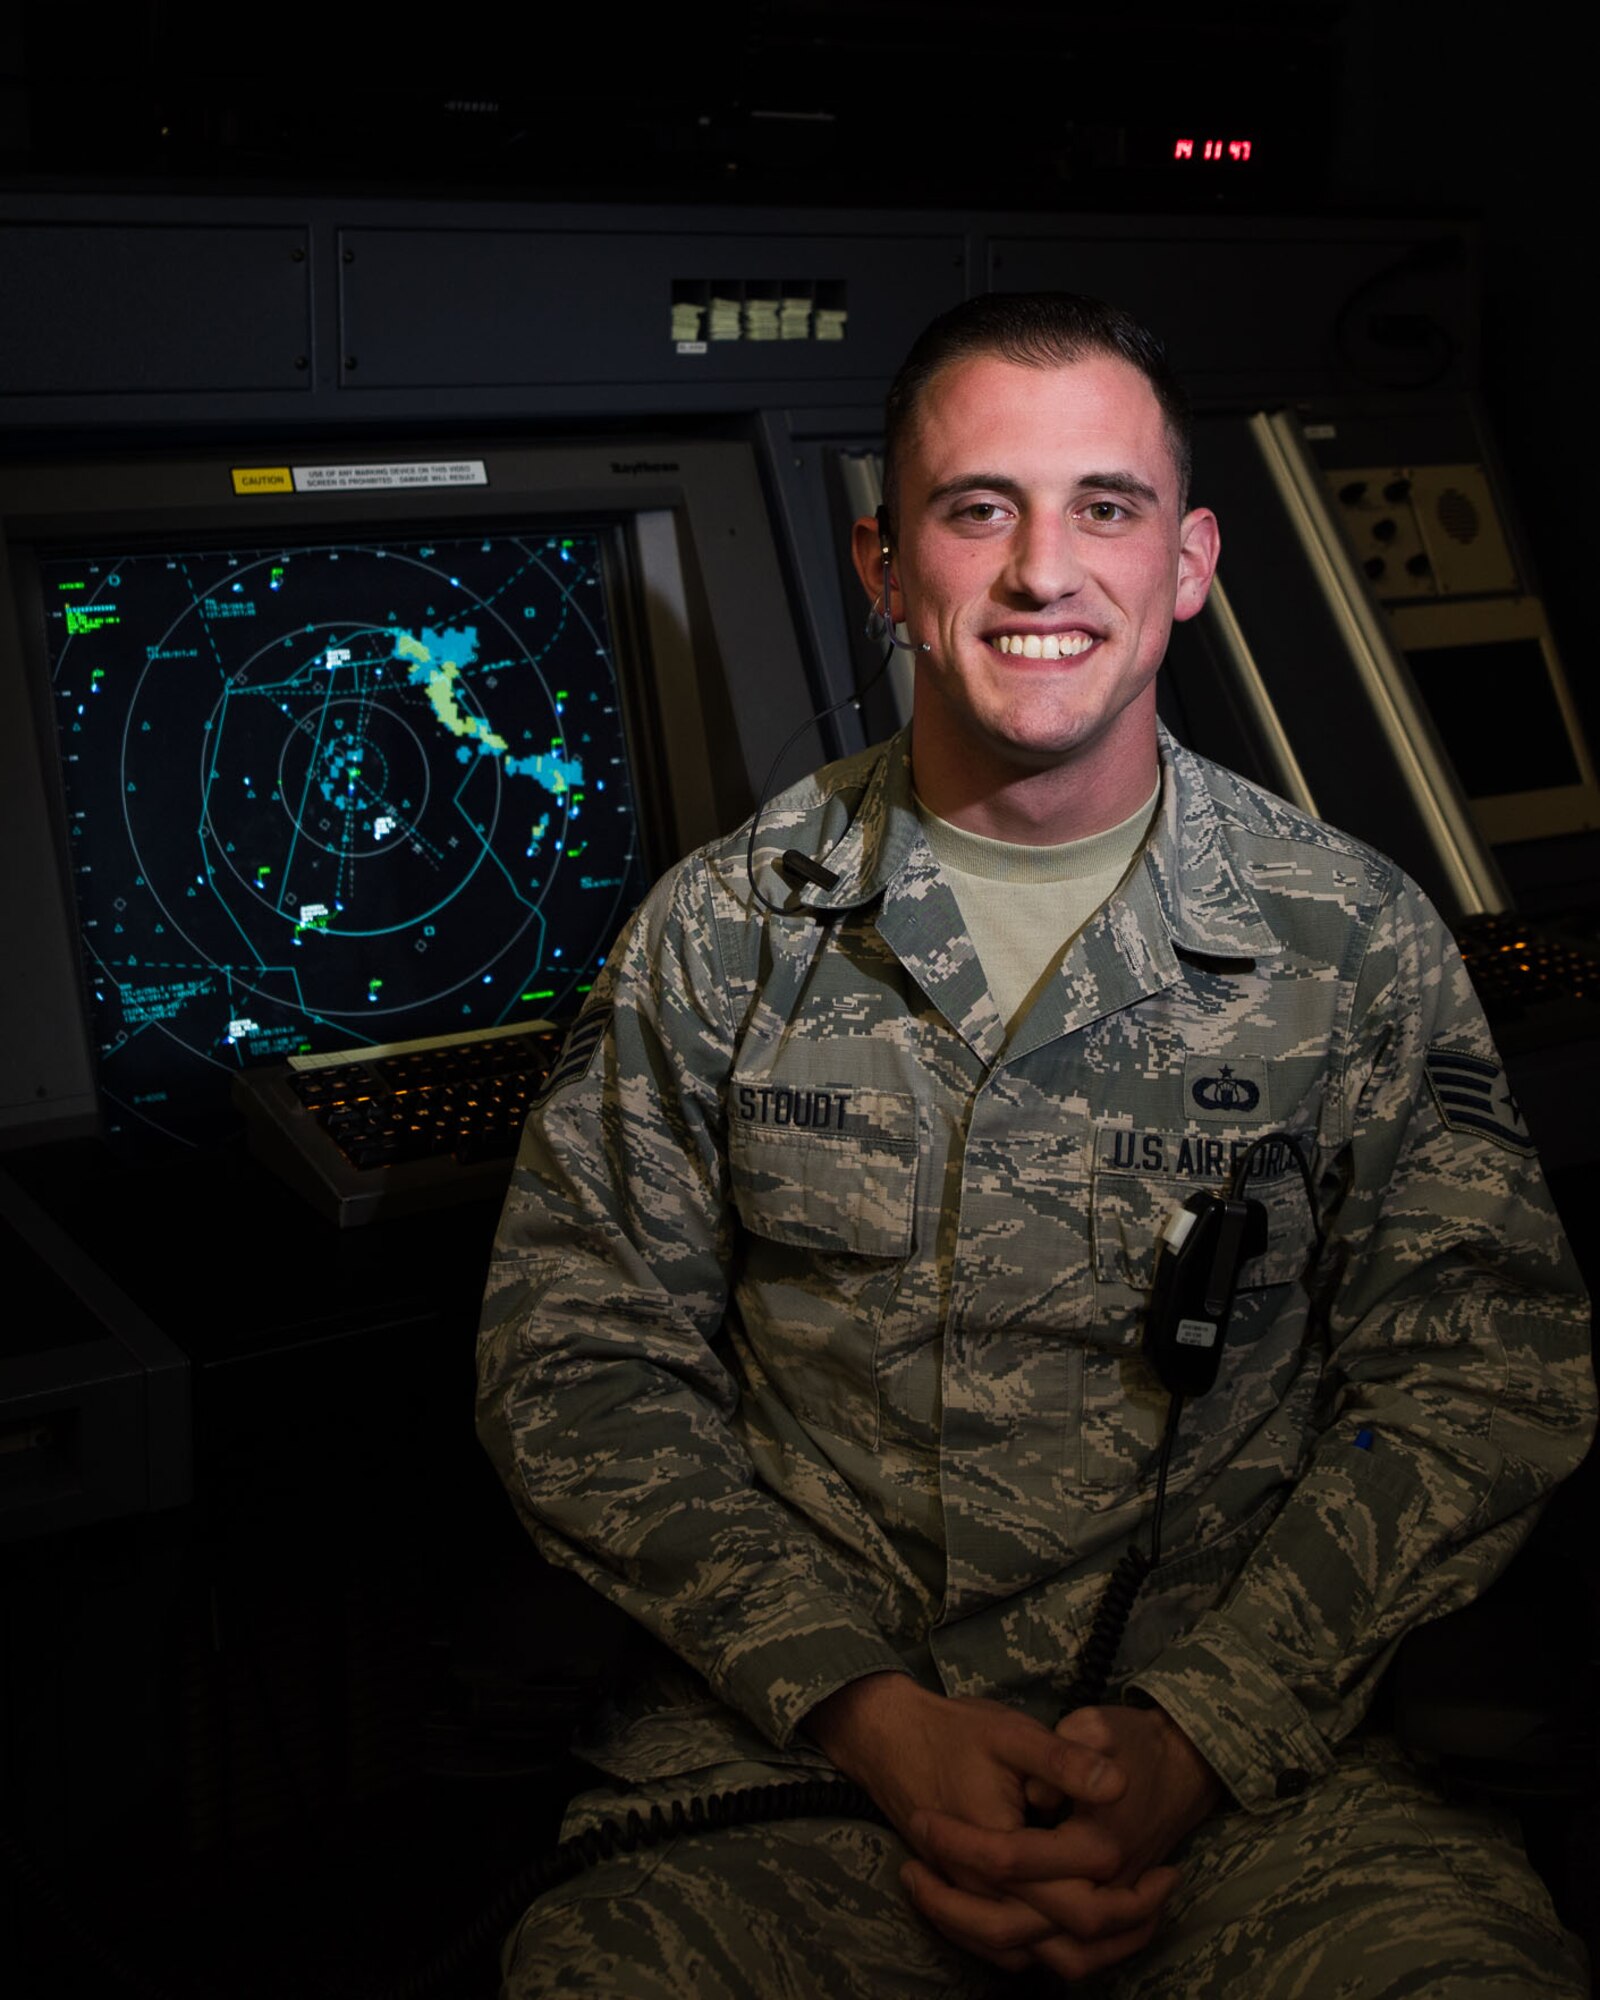 Staff Sgt. Justin Stoudt, 436th Operations Support Squadron Radar Approach Control air traffic controller, poses for a portrait April 23, 2018, at Dover Air Force Base, Del. Stoudt was selected as a recipient of the Lt. Gen. Gordon A. Blake Aircraft Save Award for his outstanding performance while assisting a pilot who declared an in-flight emergency in October 2017. (U.S. Air Force photo by Airman 1st Class Zoe M. Wockenfuss)